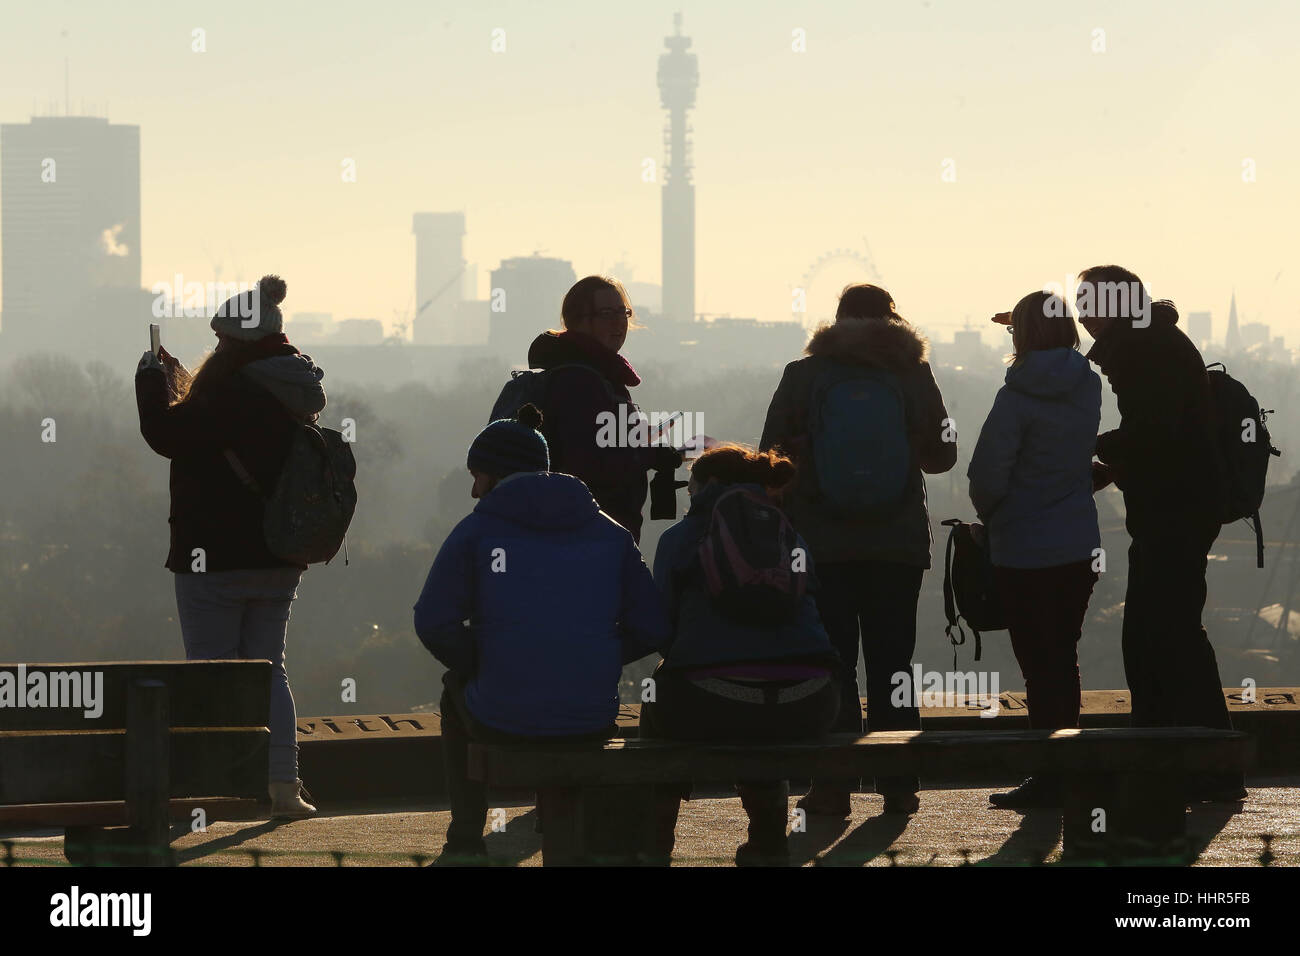 Smog and fumes across Central London from Primrose Hill Nigel Bowles/Alamy Stock Photo